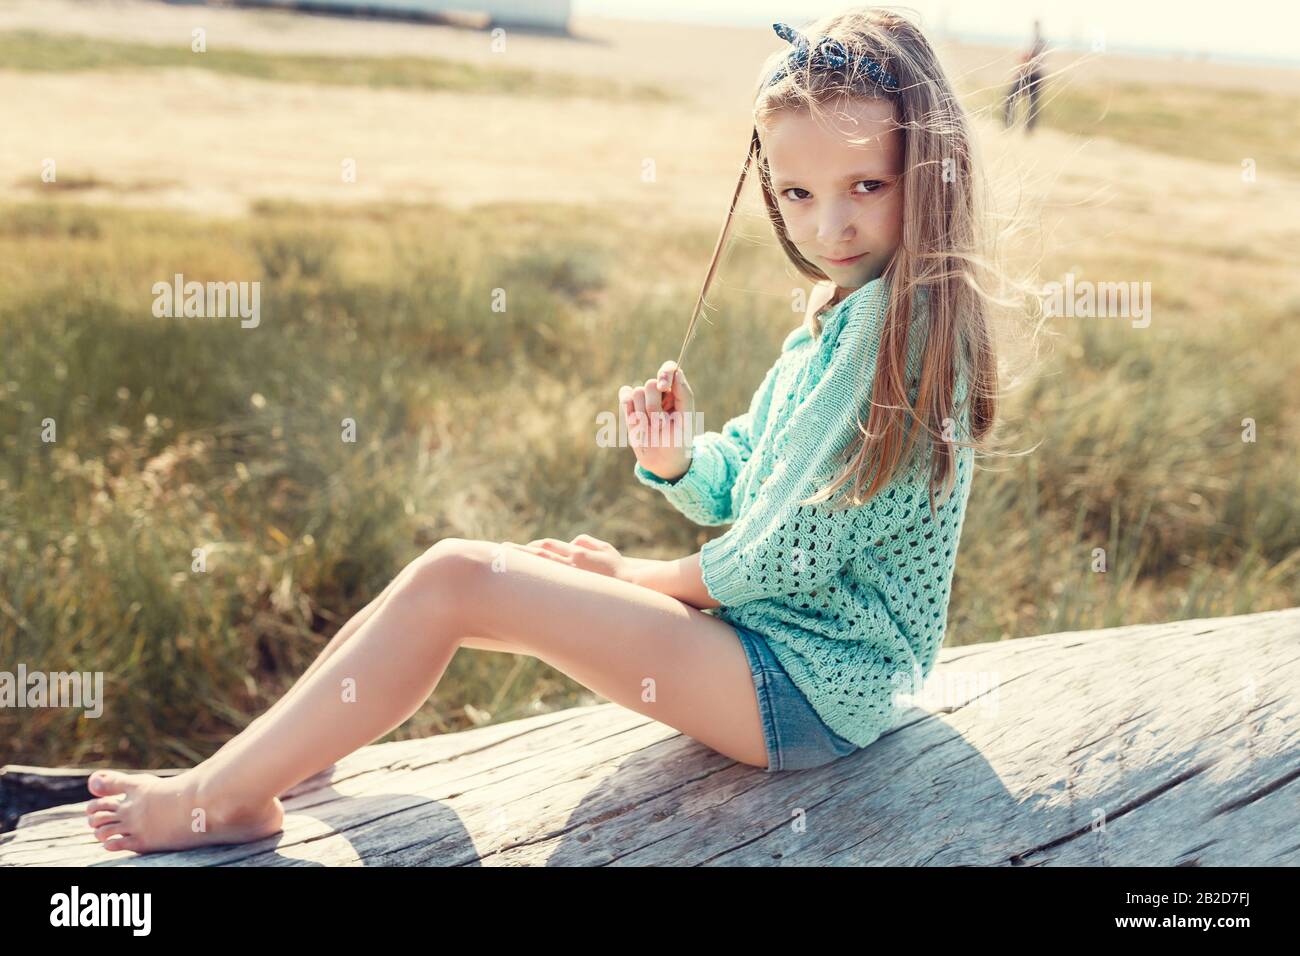 Pretty Little Girl Relaxing On The Beach Near Sea Summer Vacation Travel Concept Smiling Cute Little Girl On Beach Vacation Stock Photo Alamy